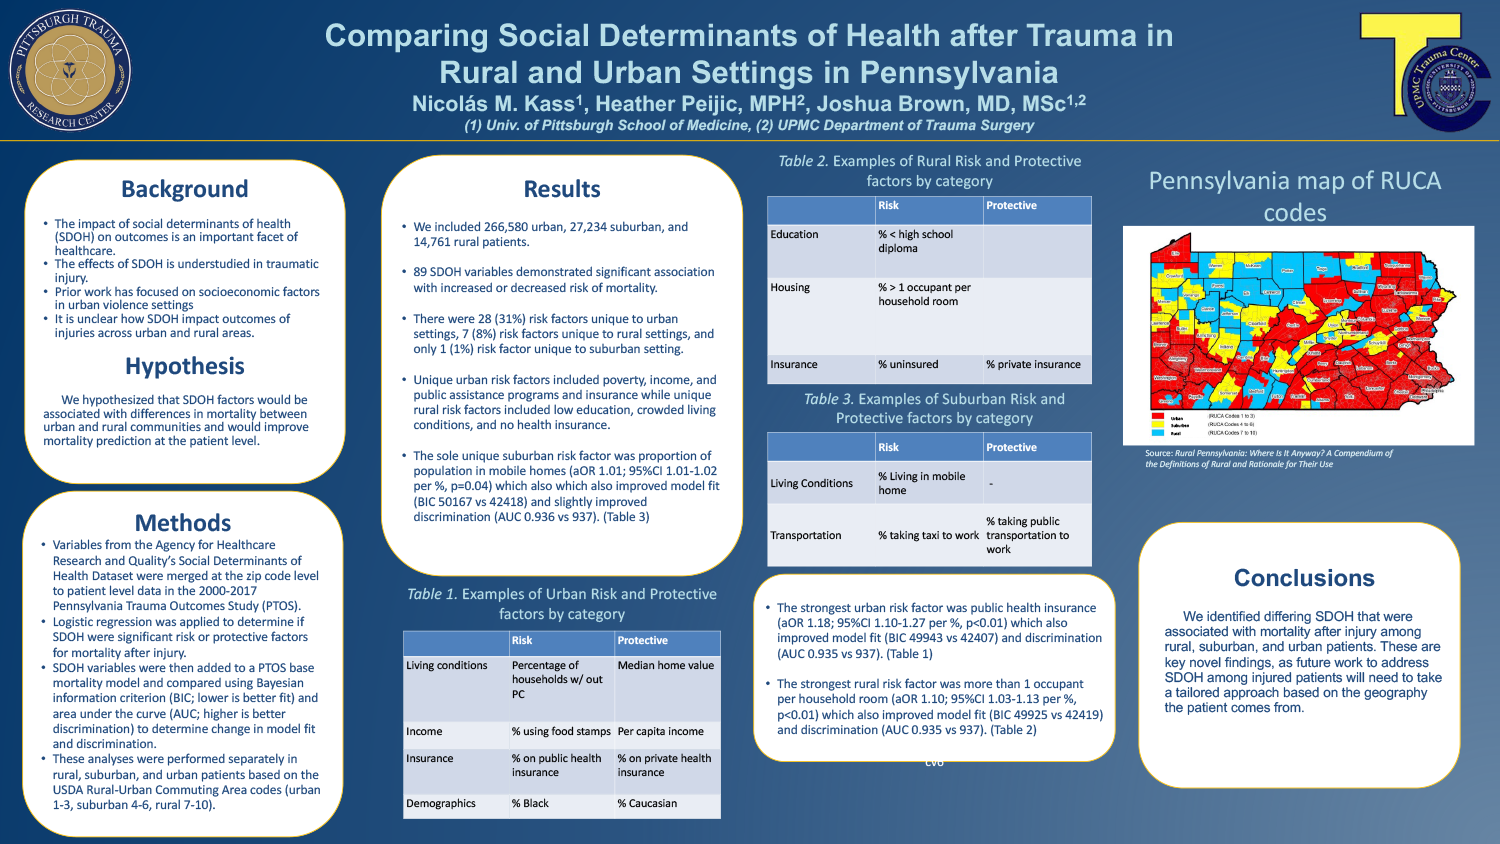 Nicolás Kass - PAW-34-Compaing-Social-Determinants-of-Health-after-Trauma-in-Rural-and-Urban-Settings-in-Pennsylvania